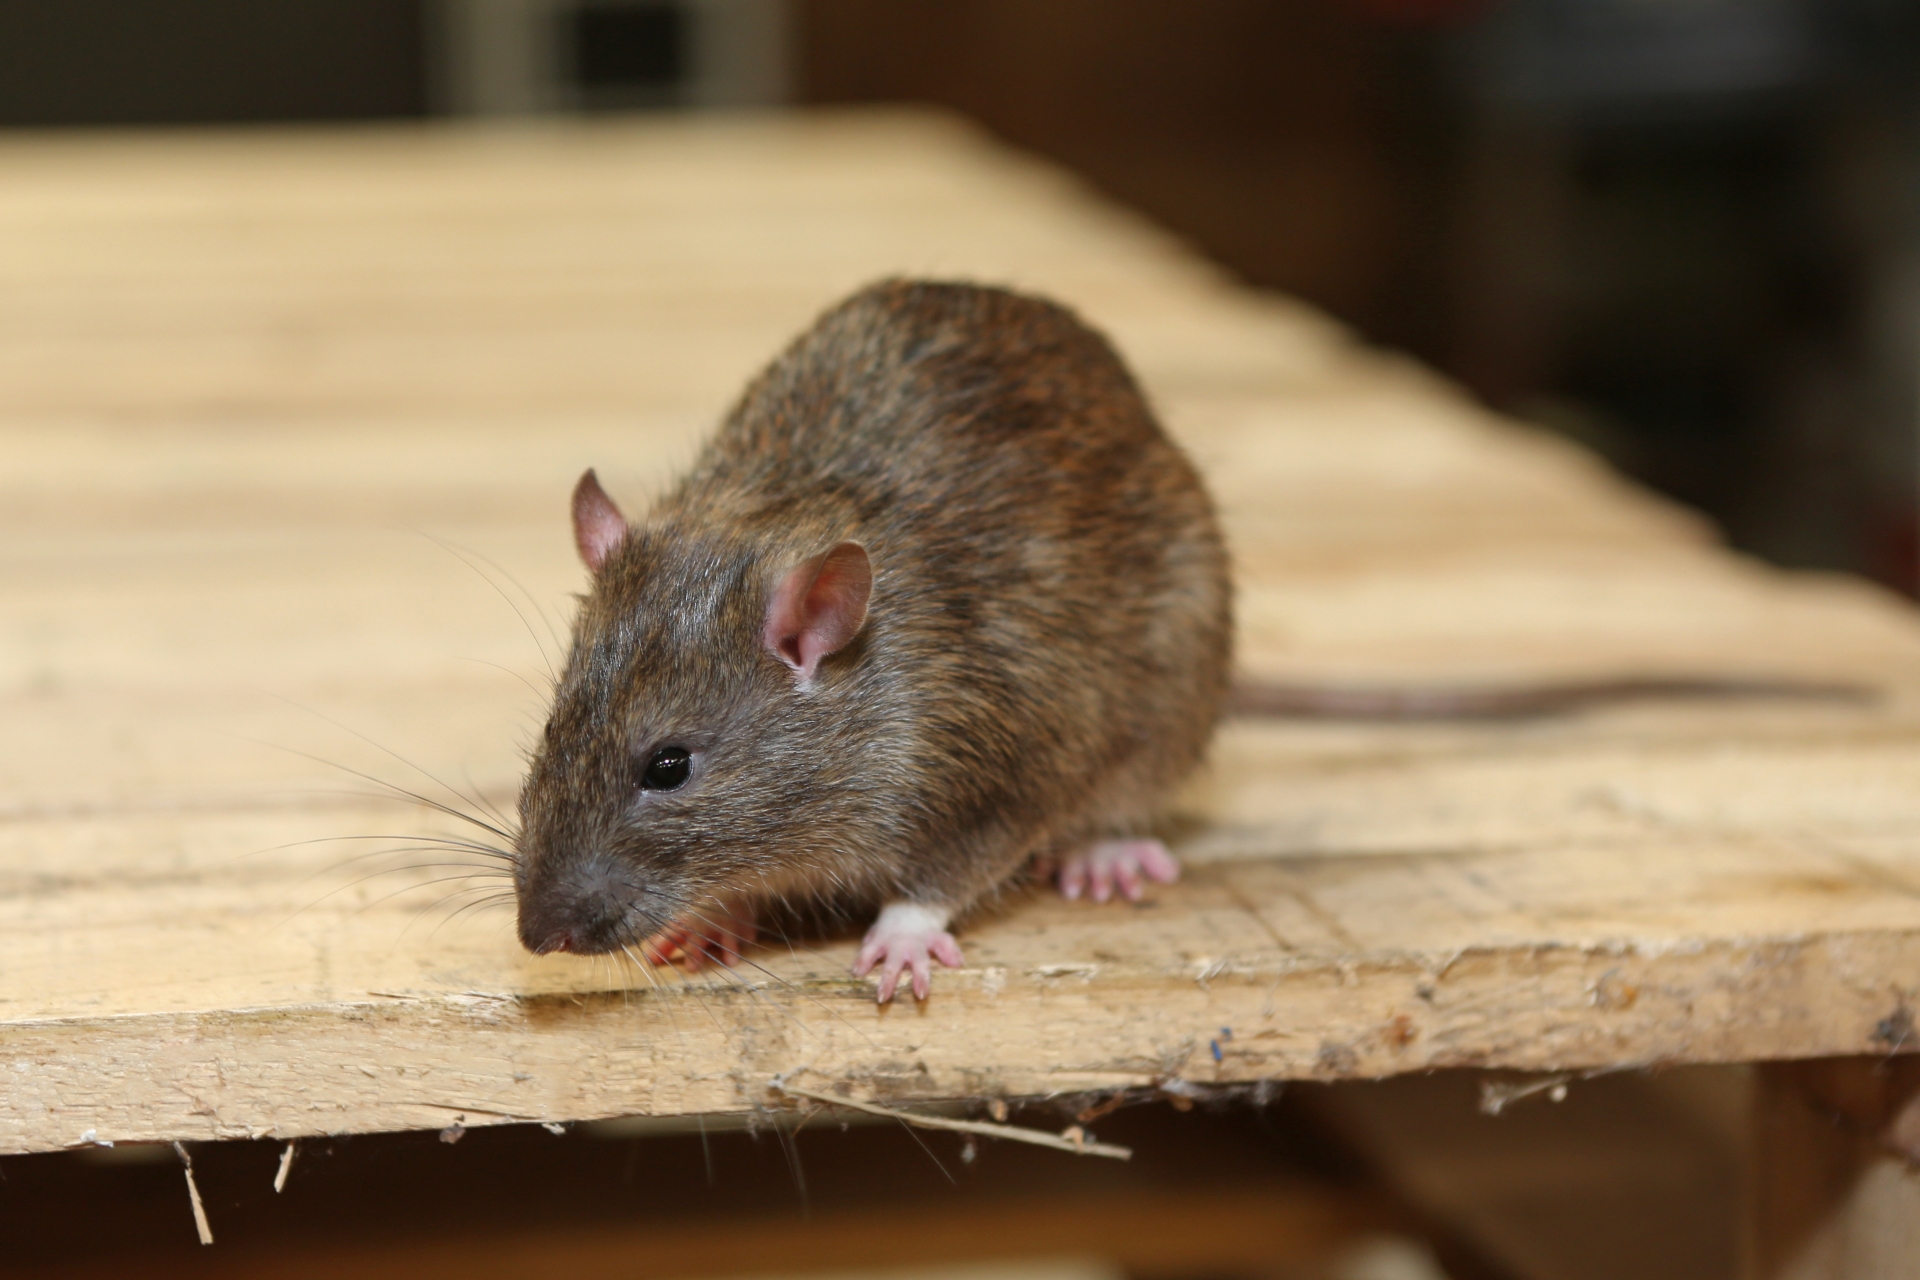 Rat Infestation, Pest Control in Kingston upon Thames, KT1. Call Now 020 8166 9746